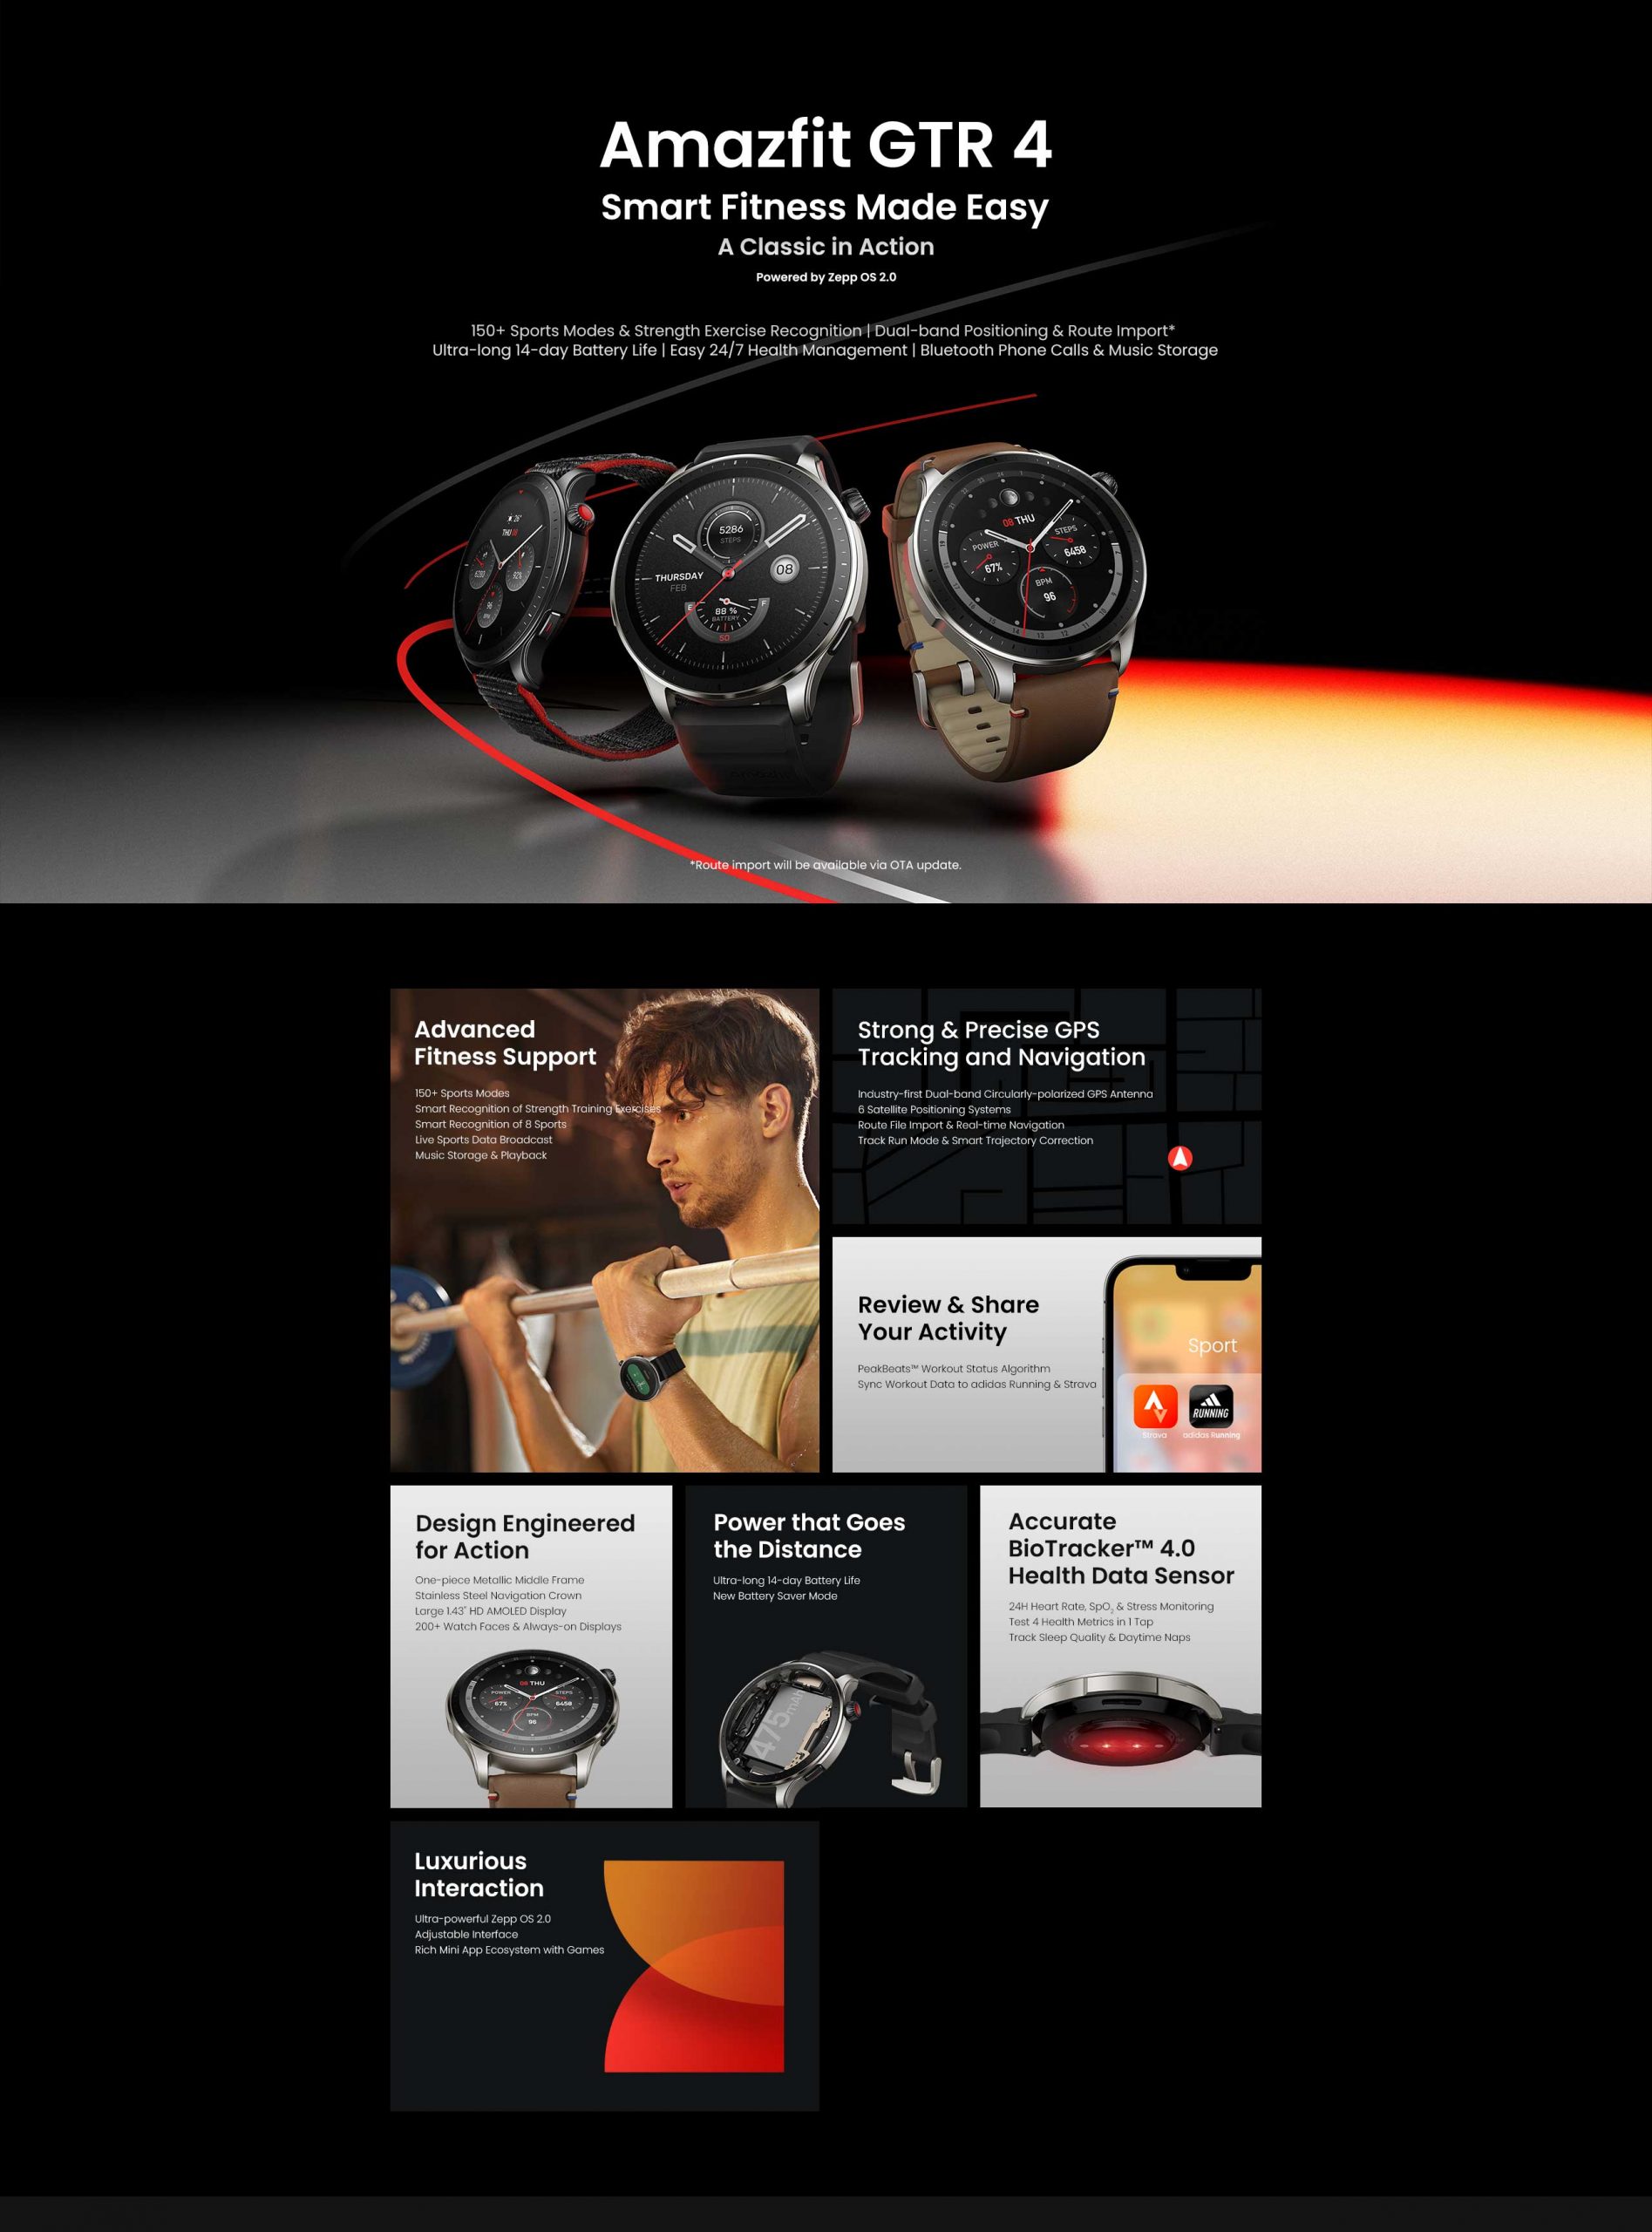 Mobile2Go. Amazfit GTR 4 [150+ Sports Modes & Strength Exercise Recognition, Dual-band Positioning & Route Import*Ultra-long 14-day Battery Life, Easy 24/7 Health Management